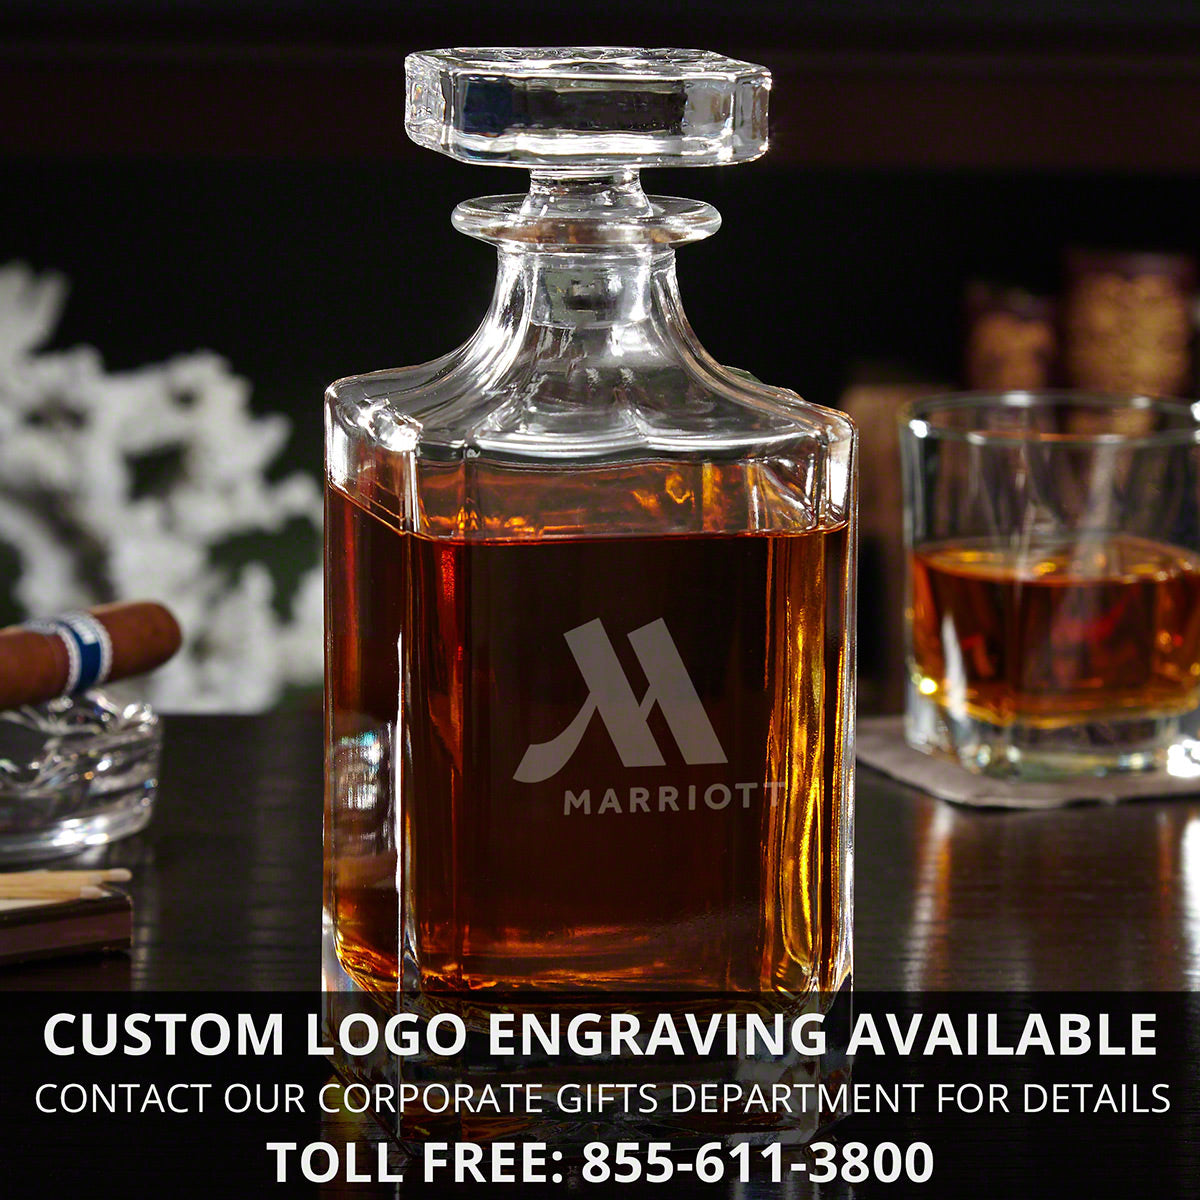 Engraved Dentist Gifts Whiskey Decanter Luxury Box Set - 7pc 